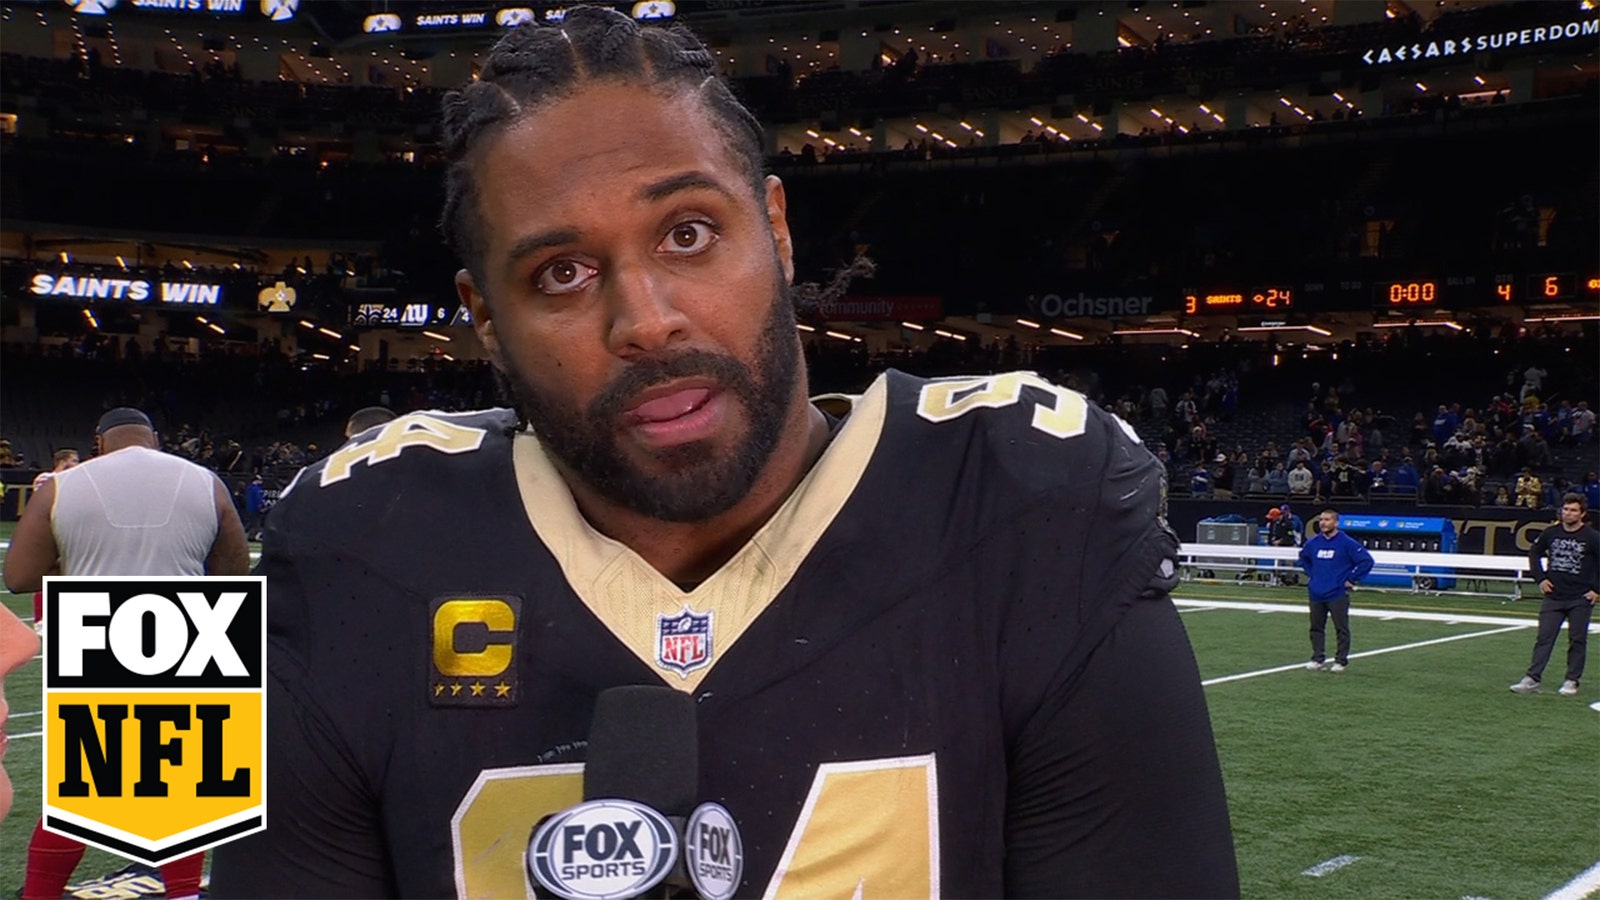 'We have our destiny in our hands' — Saints' Cameron Jordan after defeating Giants 24-6 